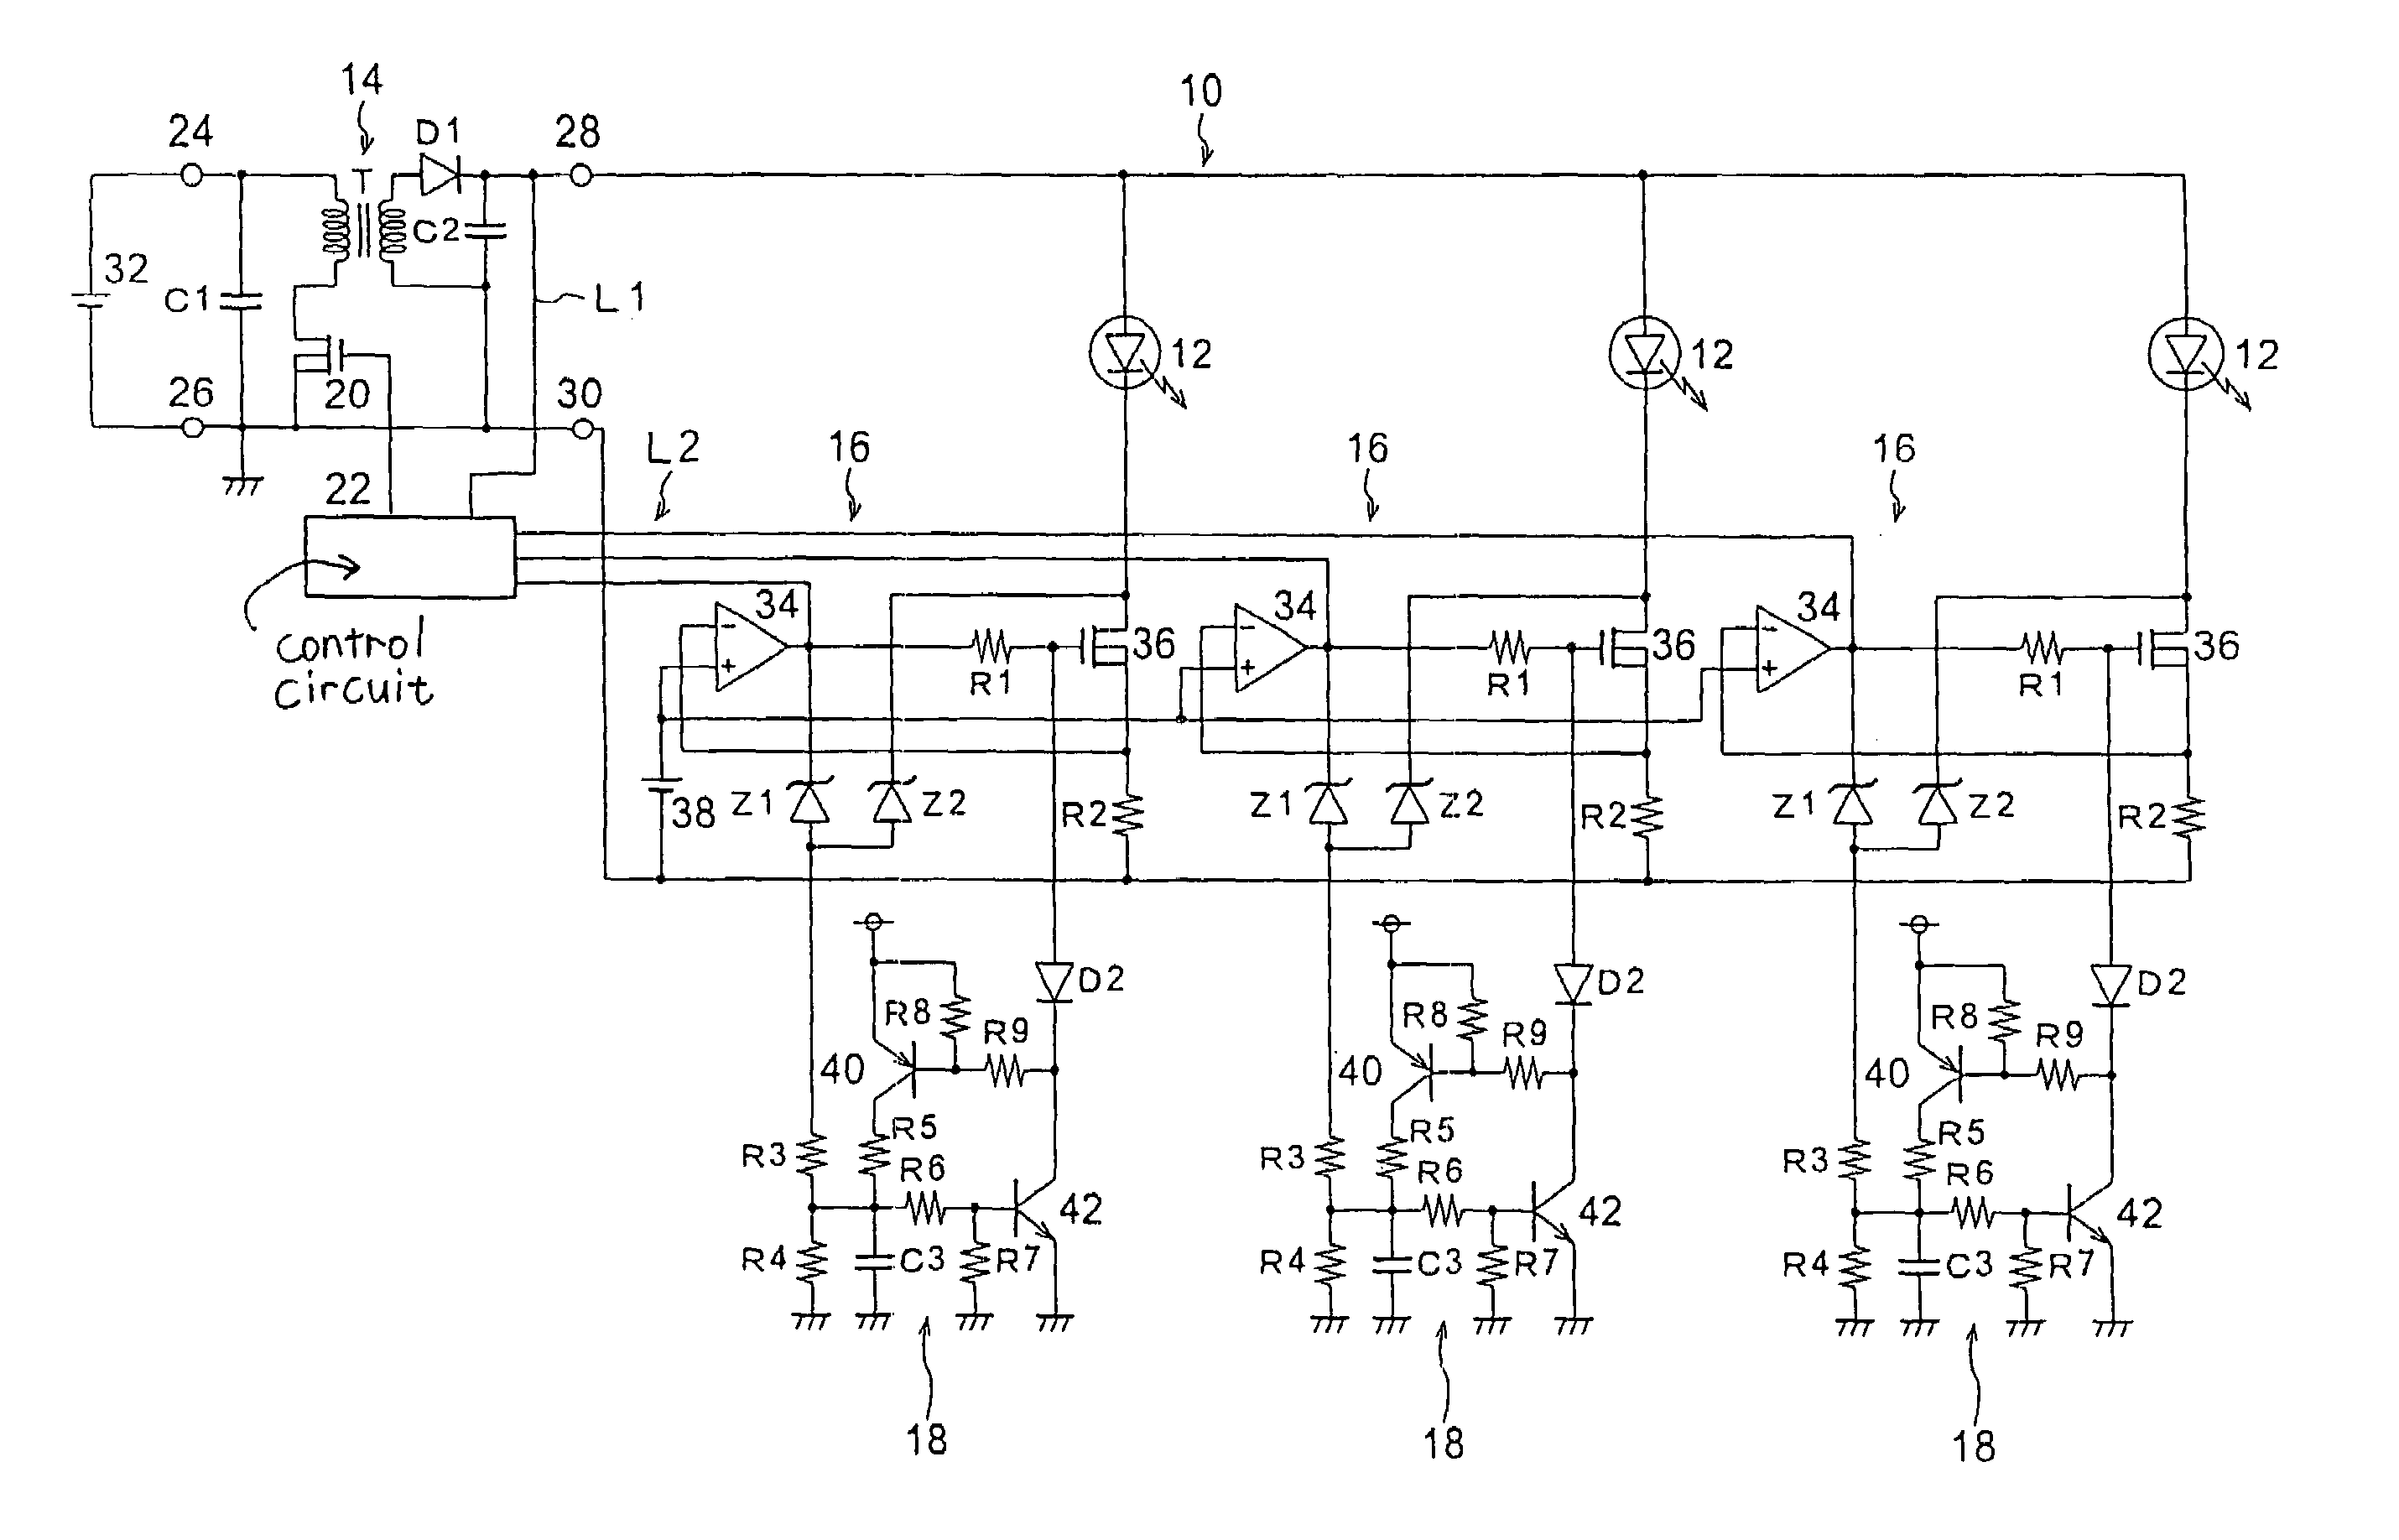 Lighting control circuit for vehicle lamps